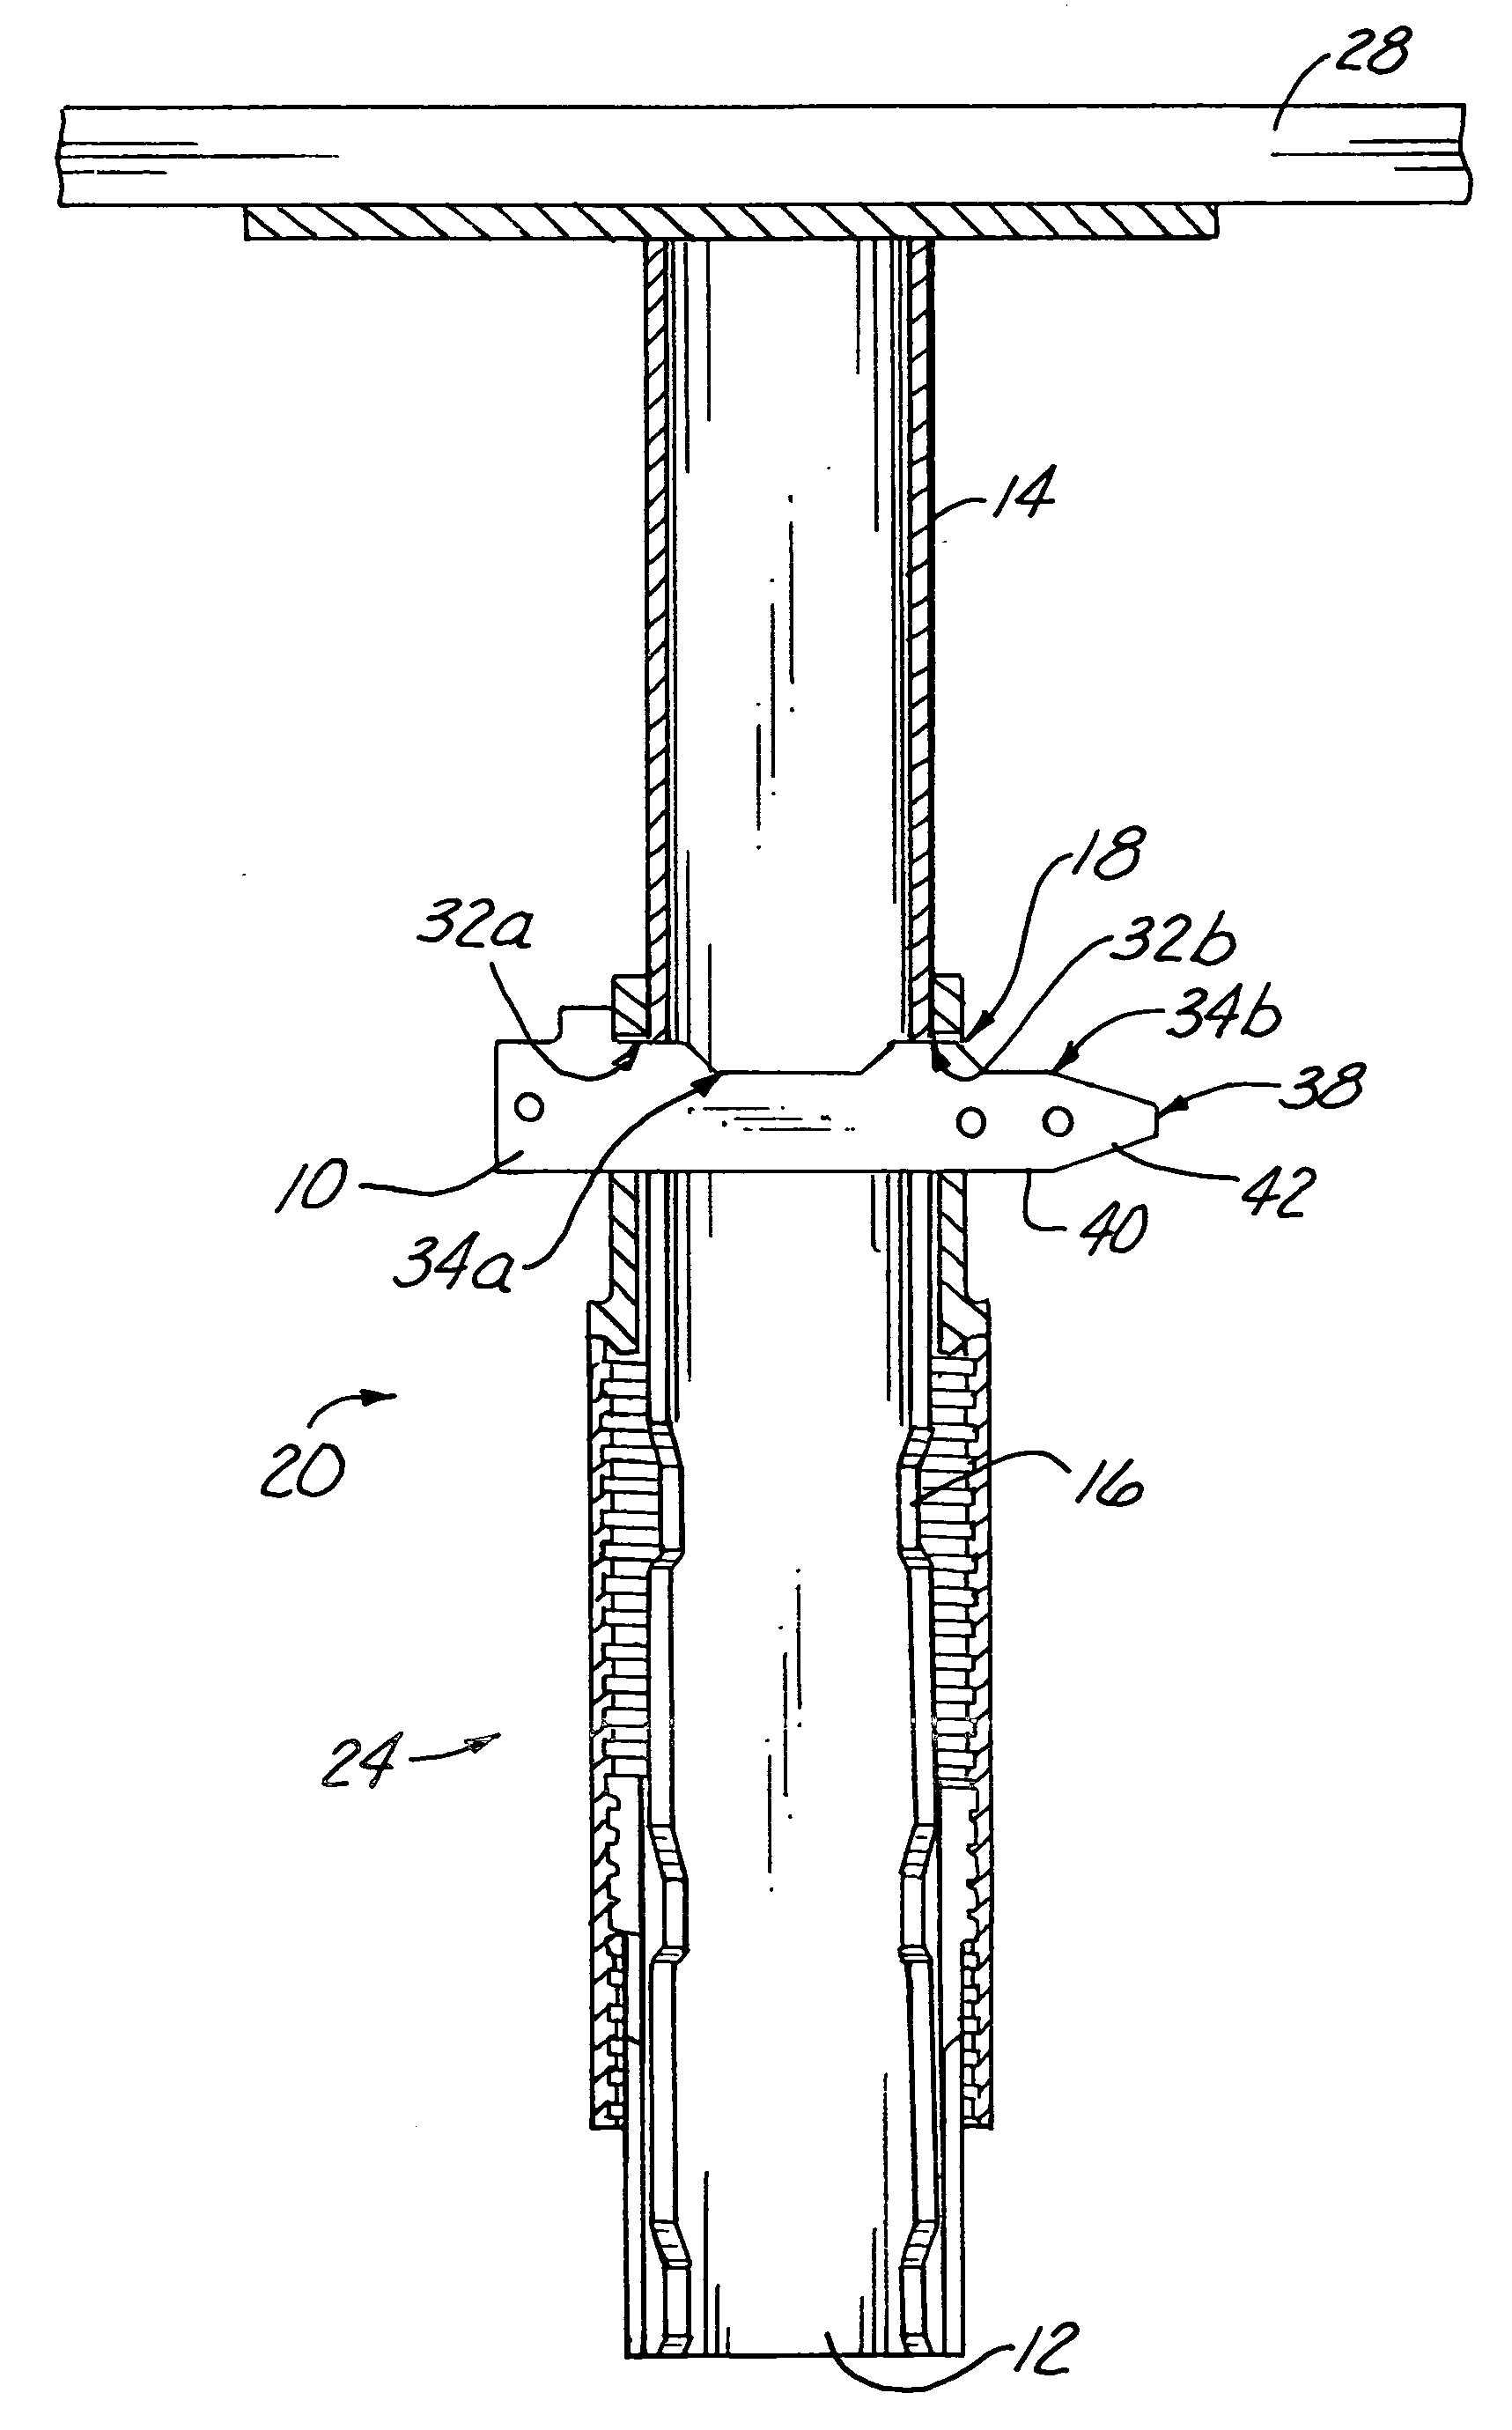 Load release pin for concrete shoring apparatus